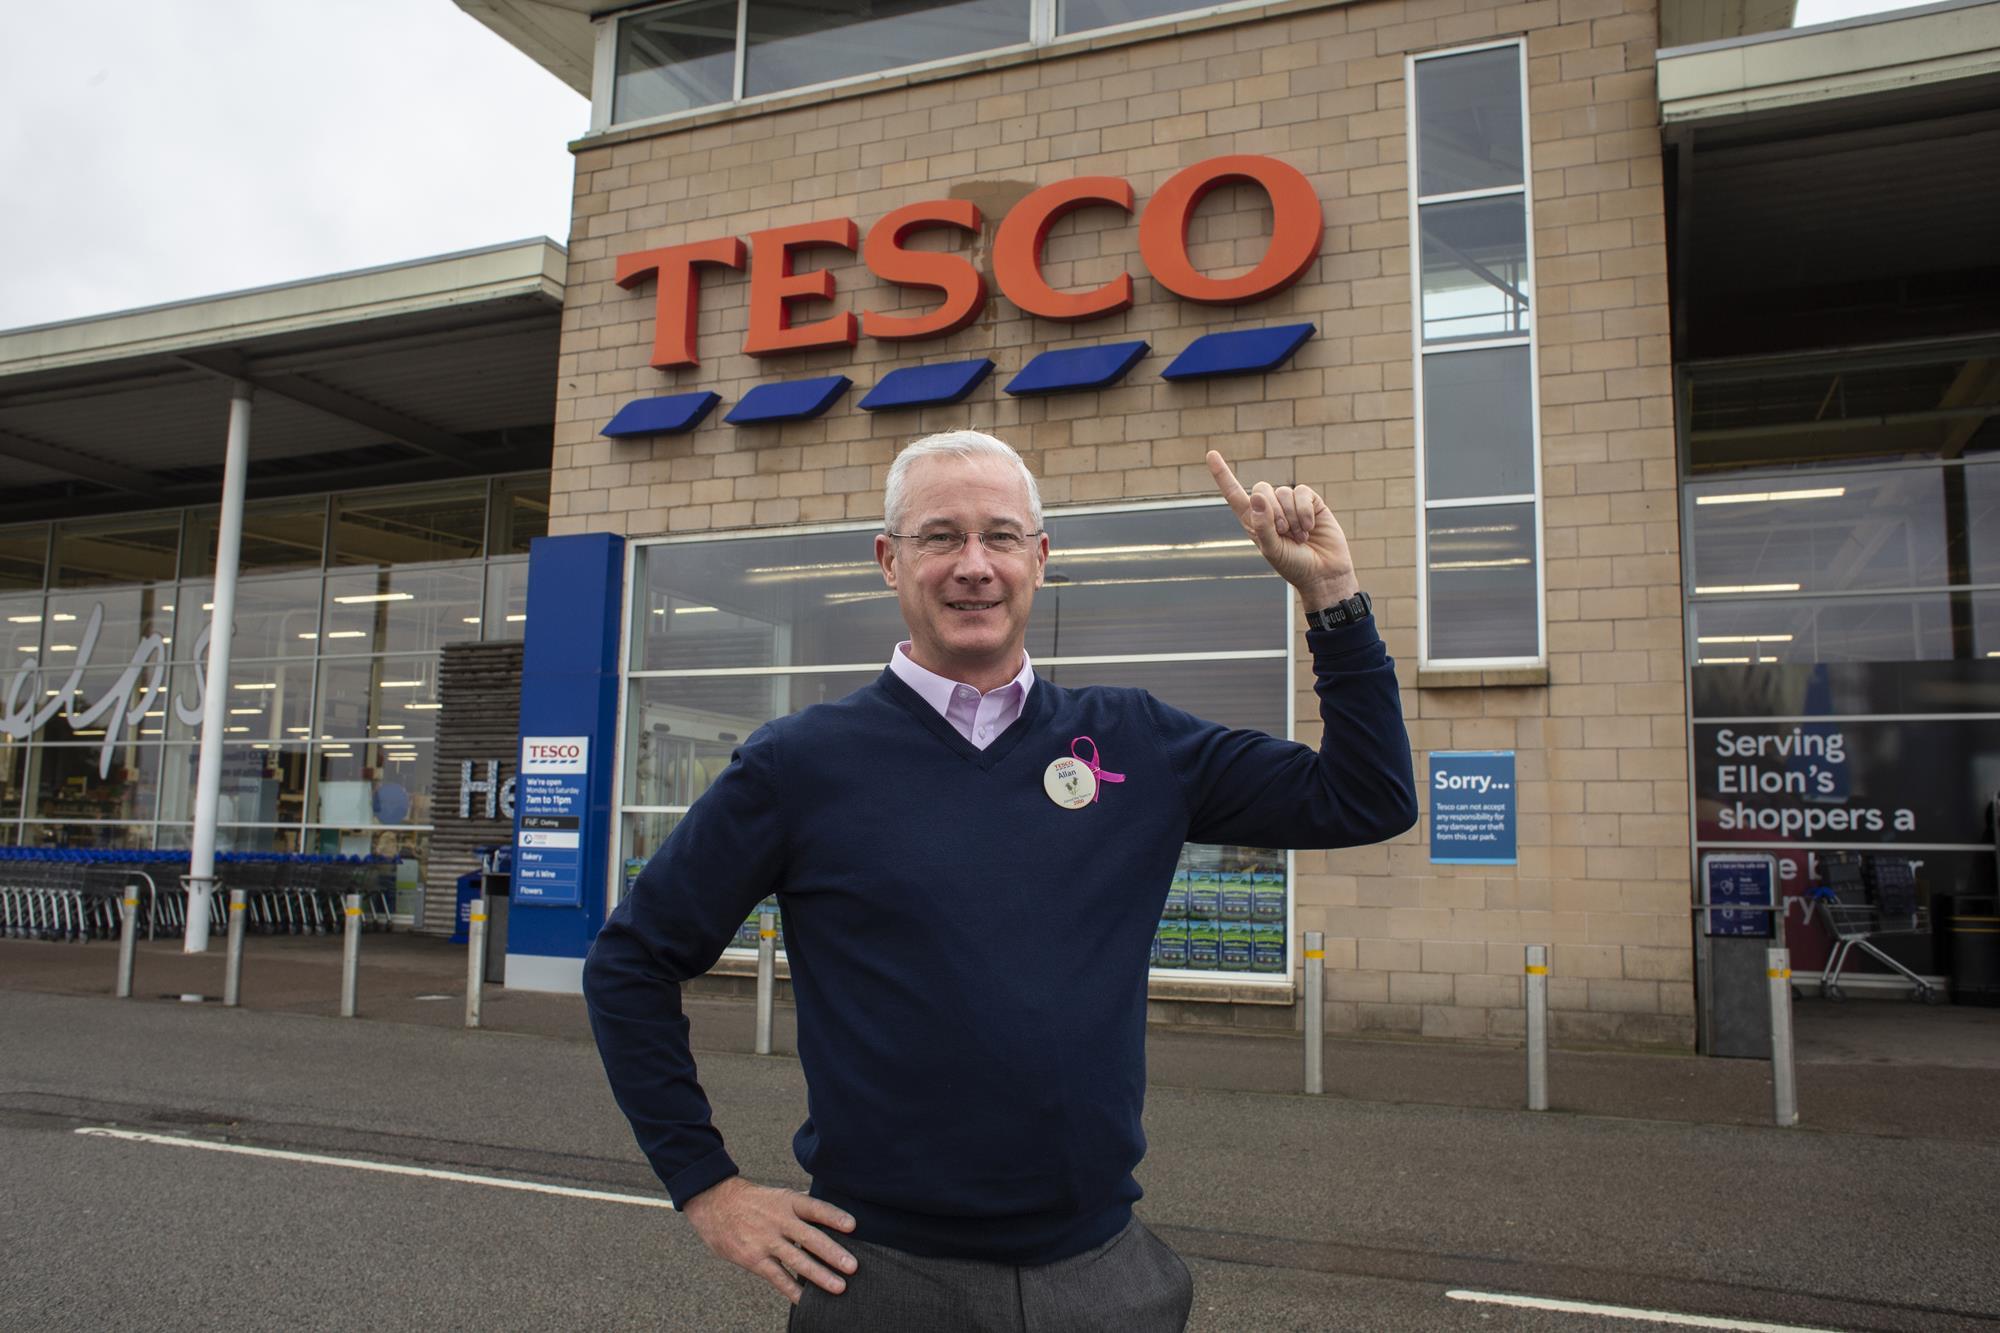 Grocer 33 store of the week: Tesco Ellon, Grocer 33